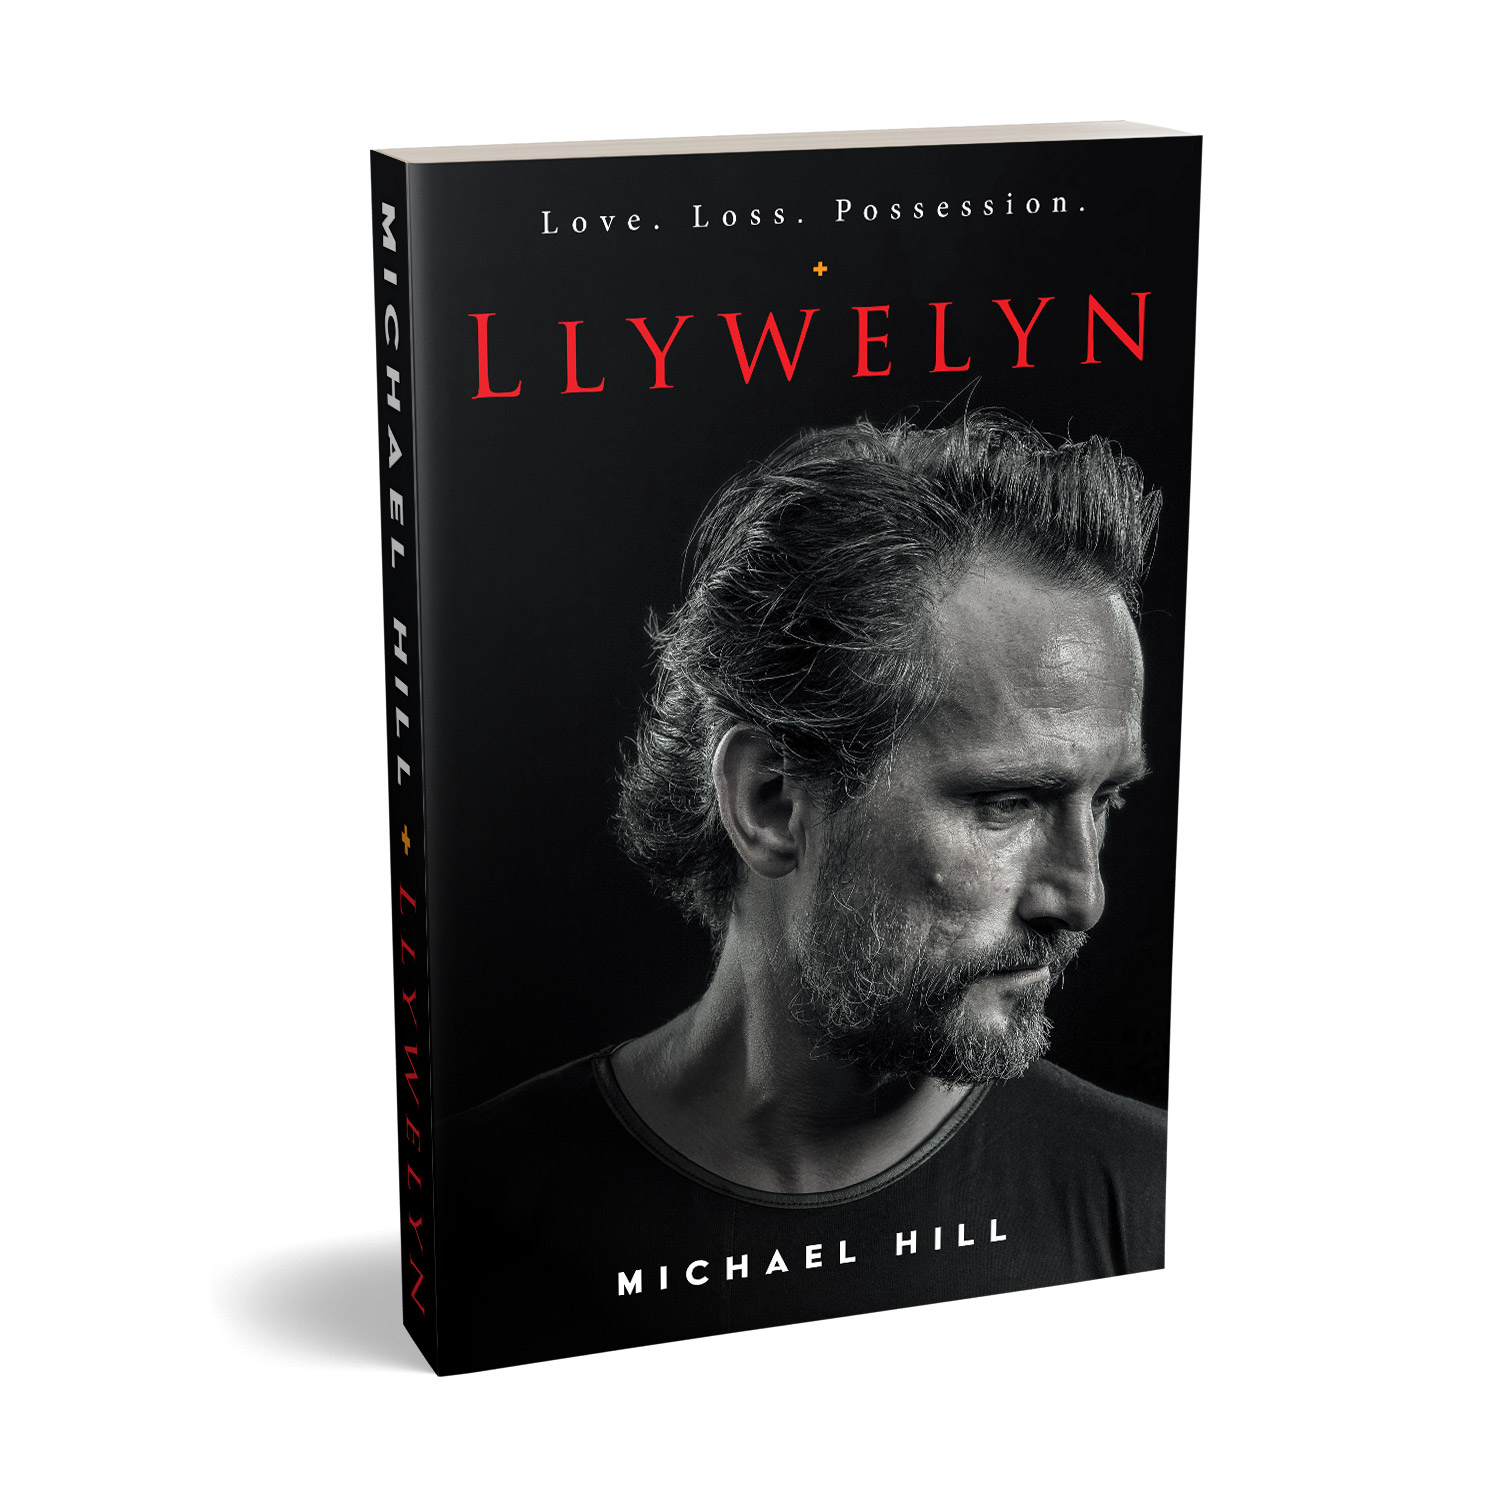 'Llywelyn' is a dark, Welsh interpersonal dramatic novel. The author is Michael Hill. The book cover design is by Mark Thomas. To learn more about what Mark could do for your book, please visit coverness.com.